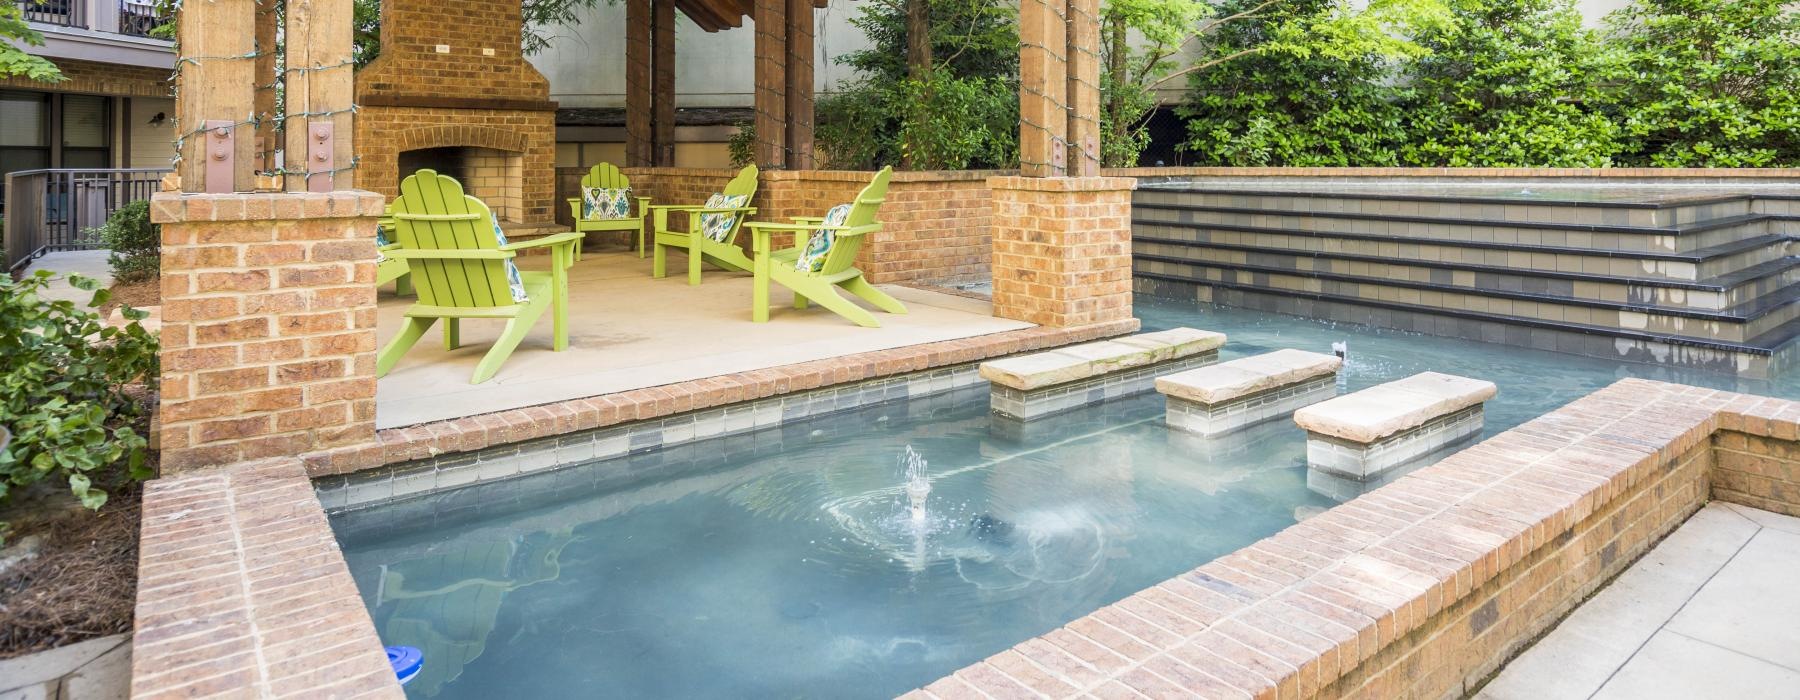 a pool or water with chairs and a covered patio